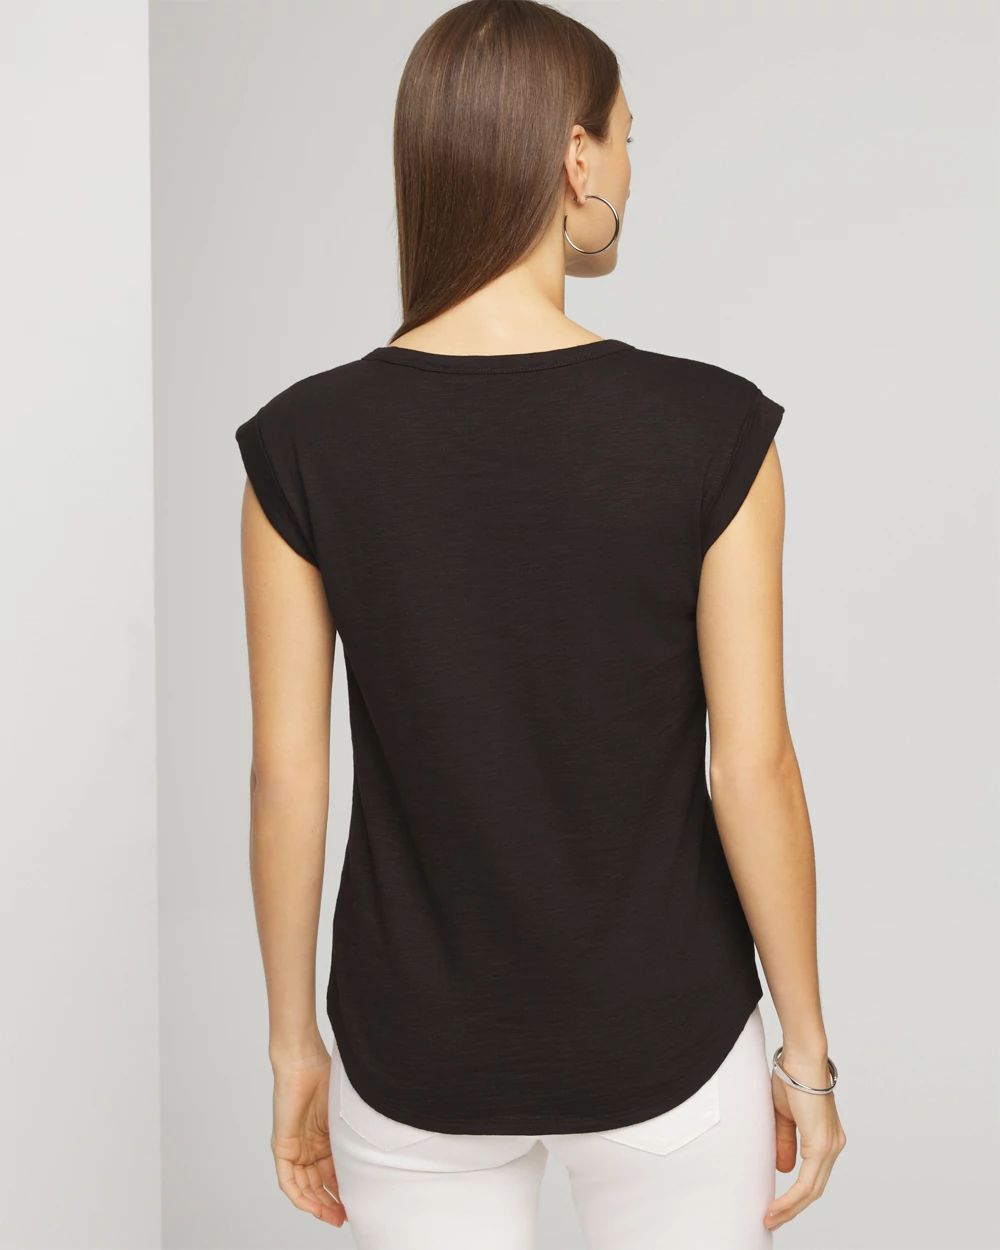 Lace-Up Shoulder Scoop Tee click to view larger image.